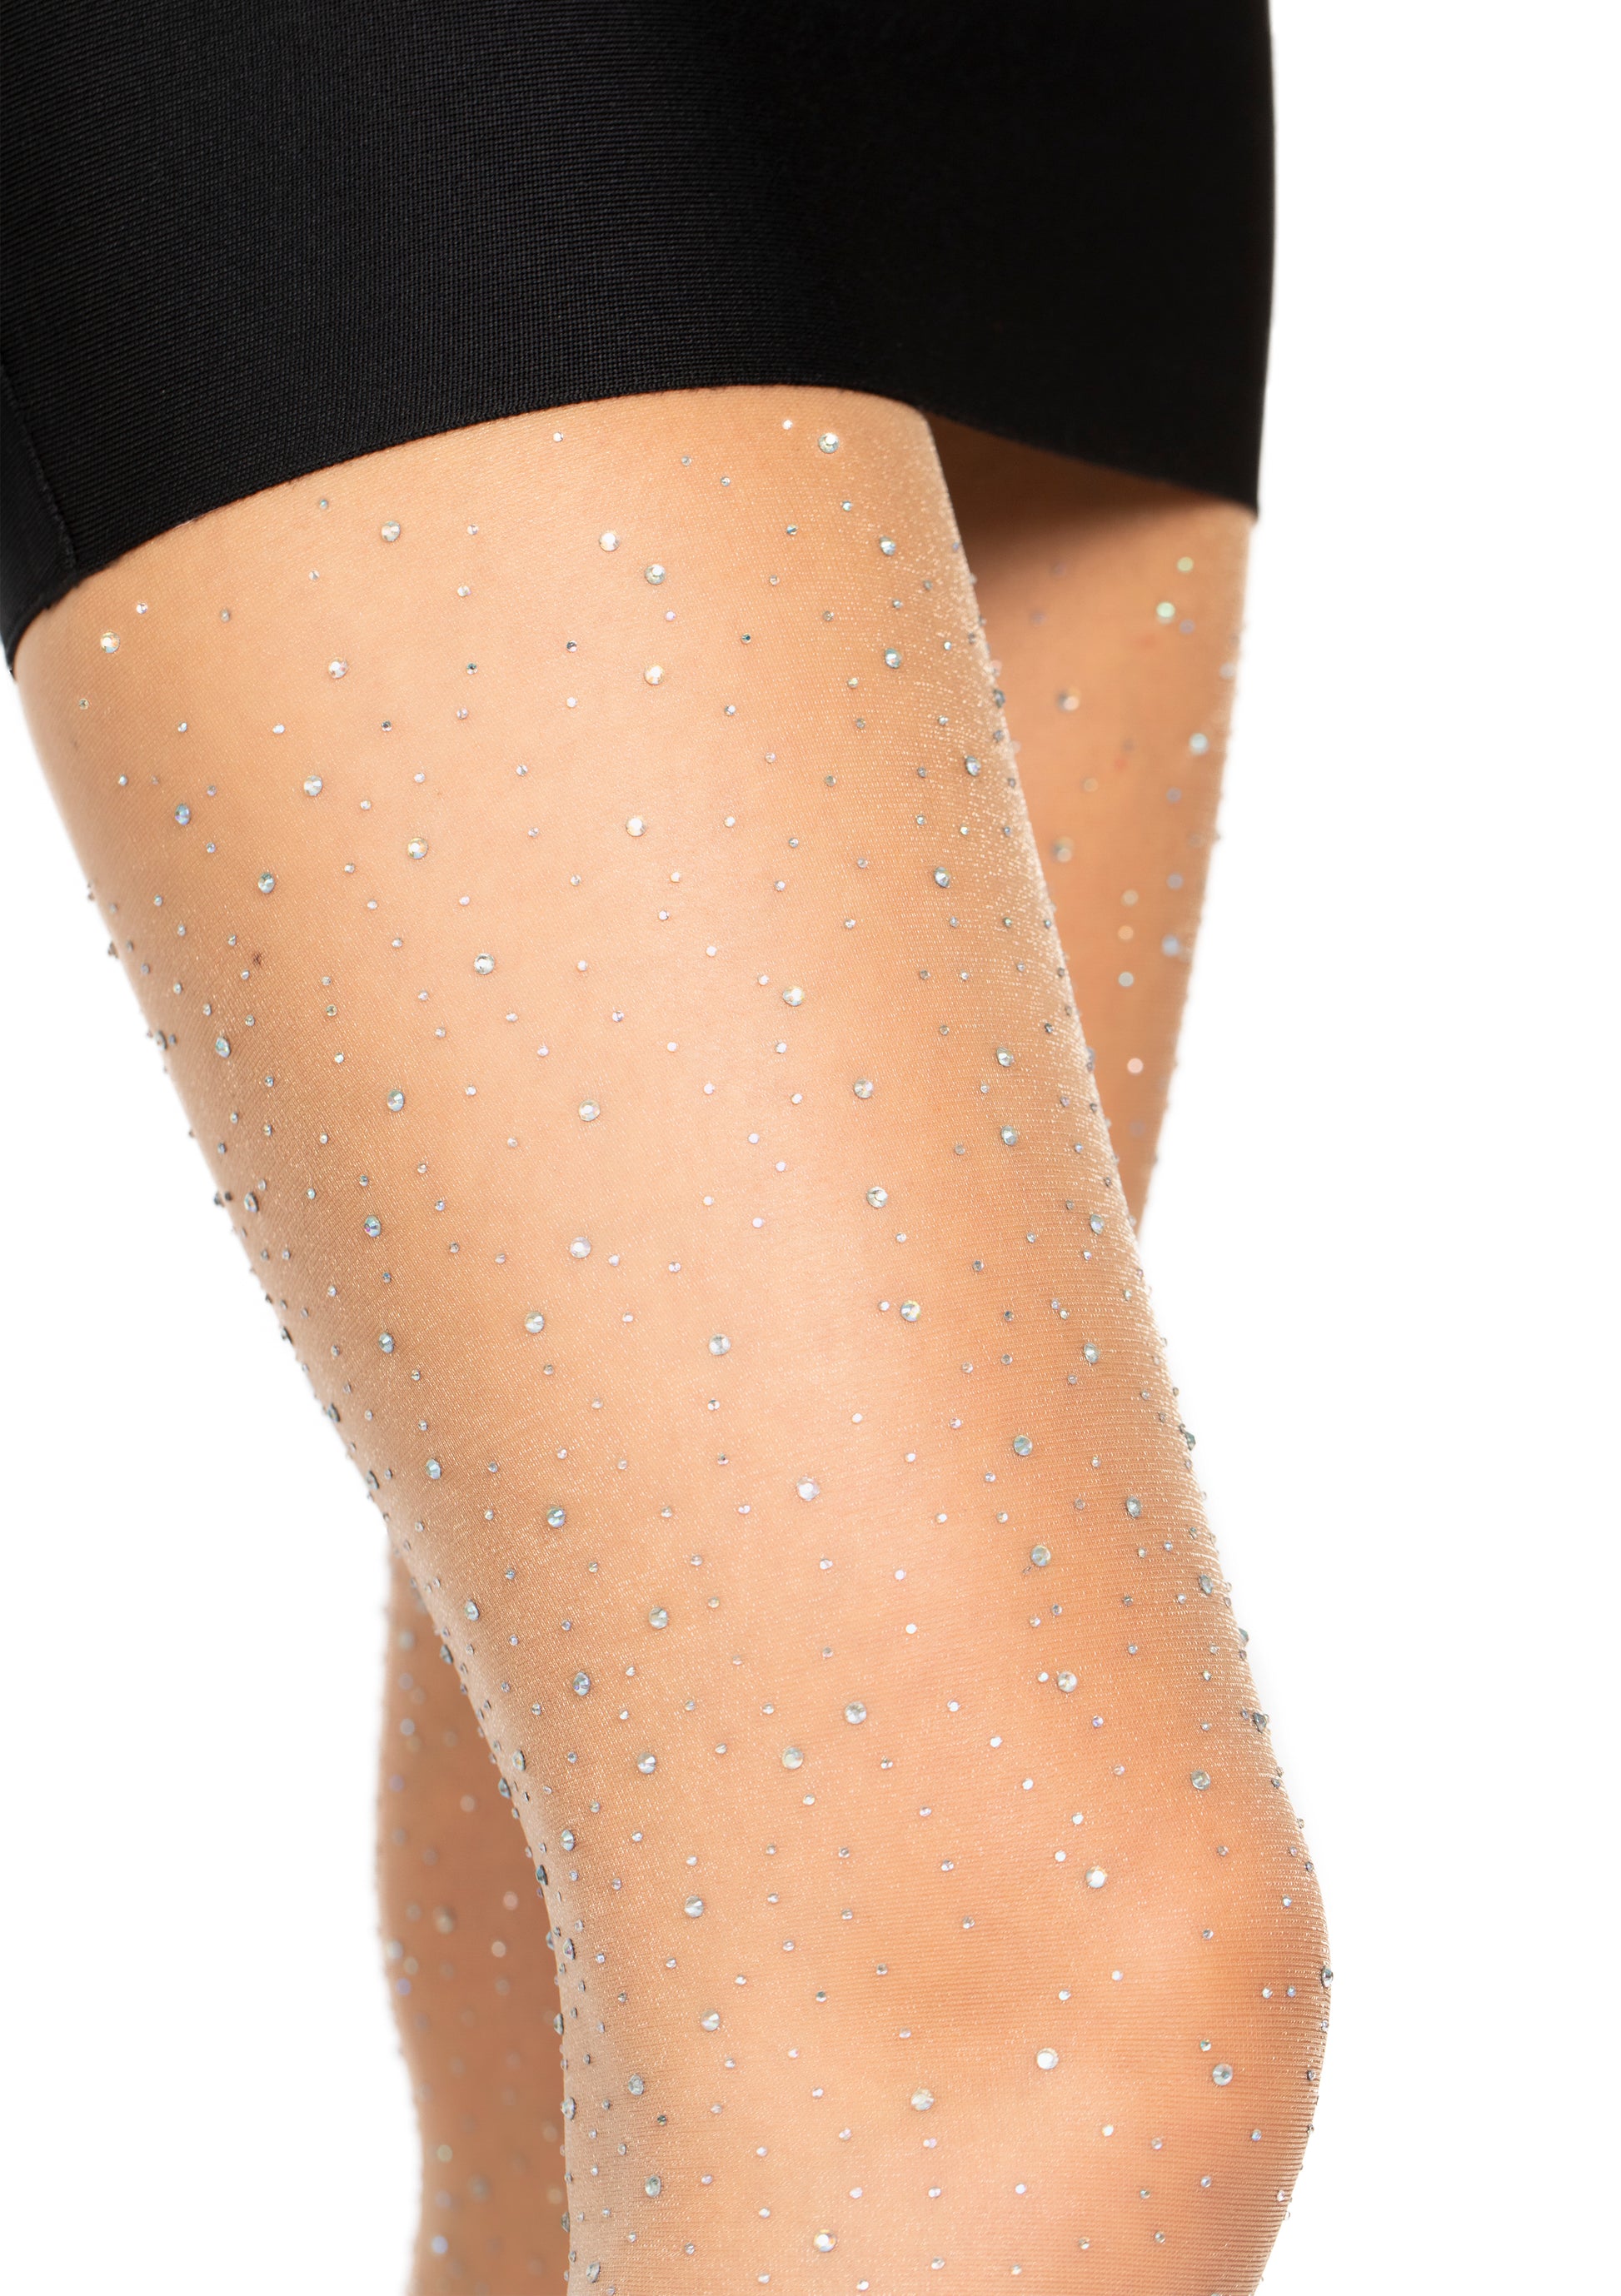 Rhinestone, AB Crystal Sheer, Nude Glitter Tights for Performers